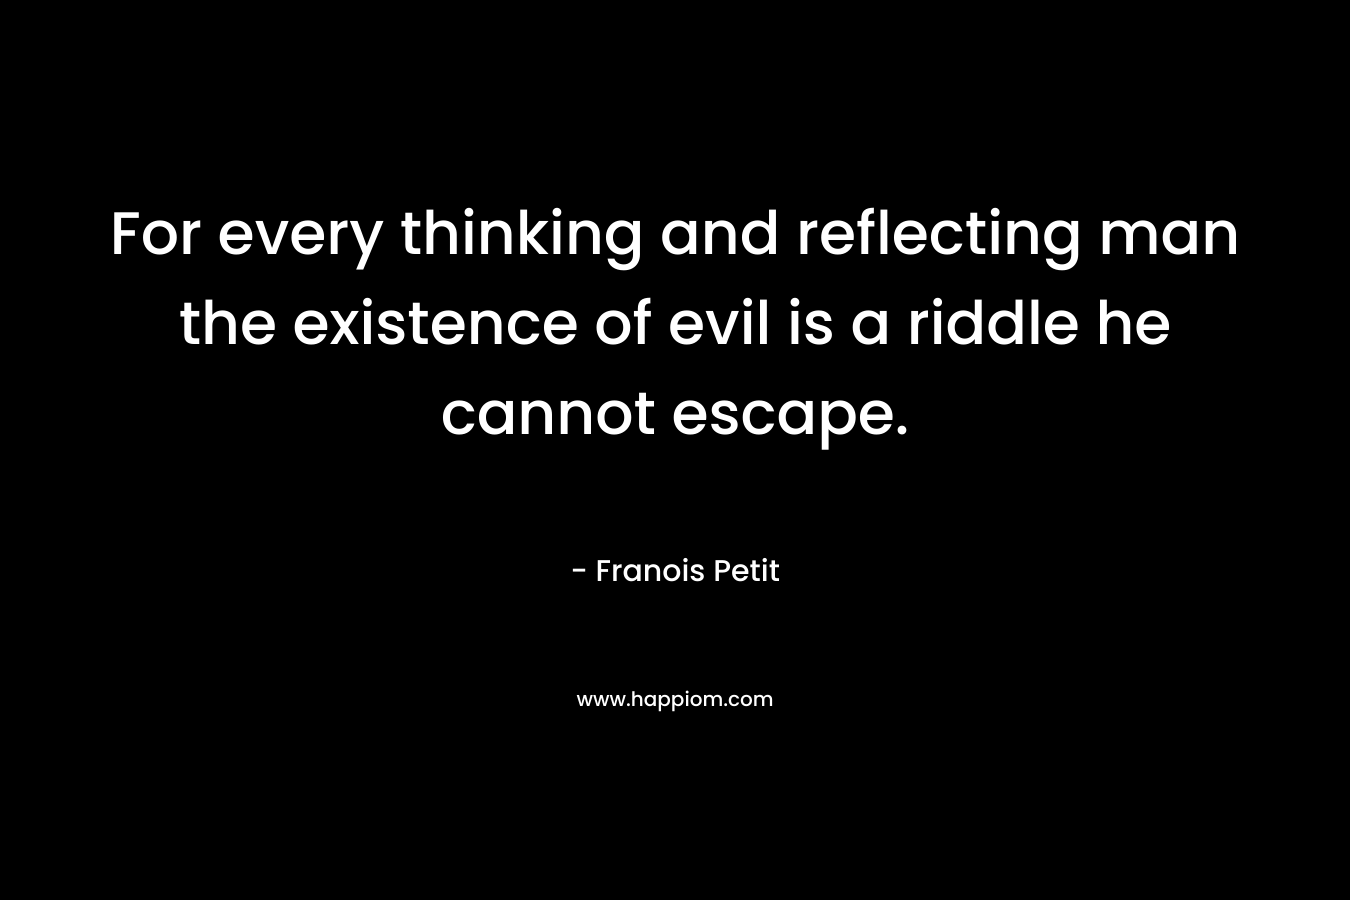 For every thinking and reflecting man the existence of evil is a riddle he cannot escape. – Franois Petit